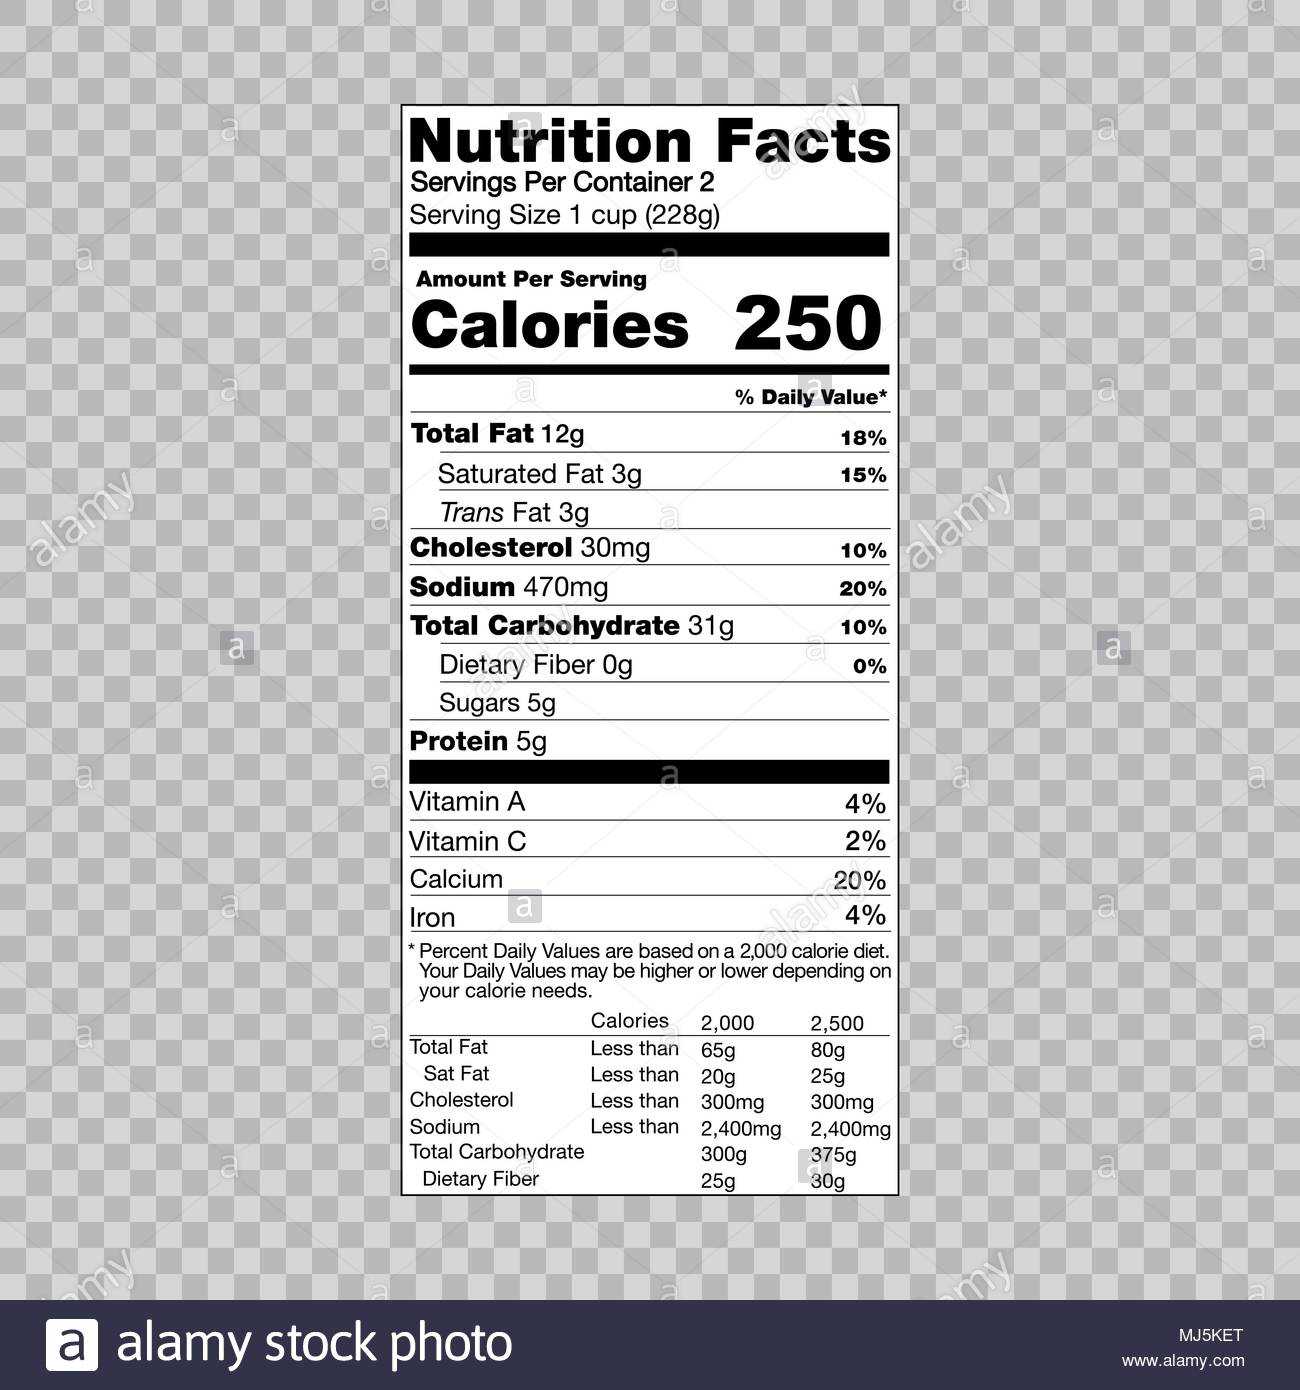 Nutrition Facts Information Template For Food Label Stock With Regard To Blank Food Label Template